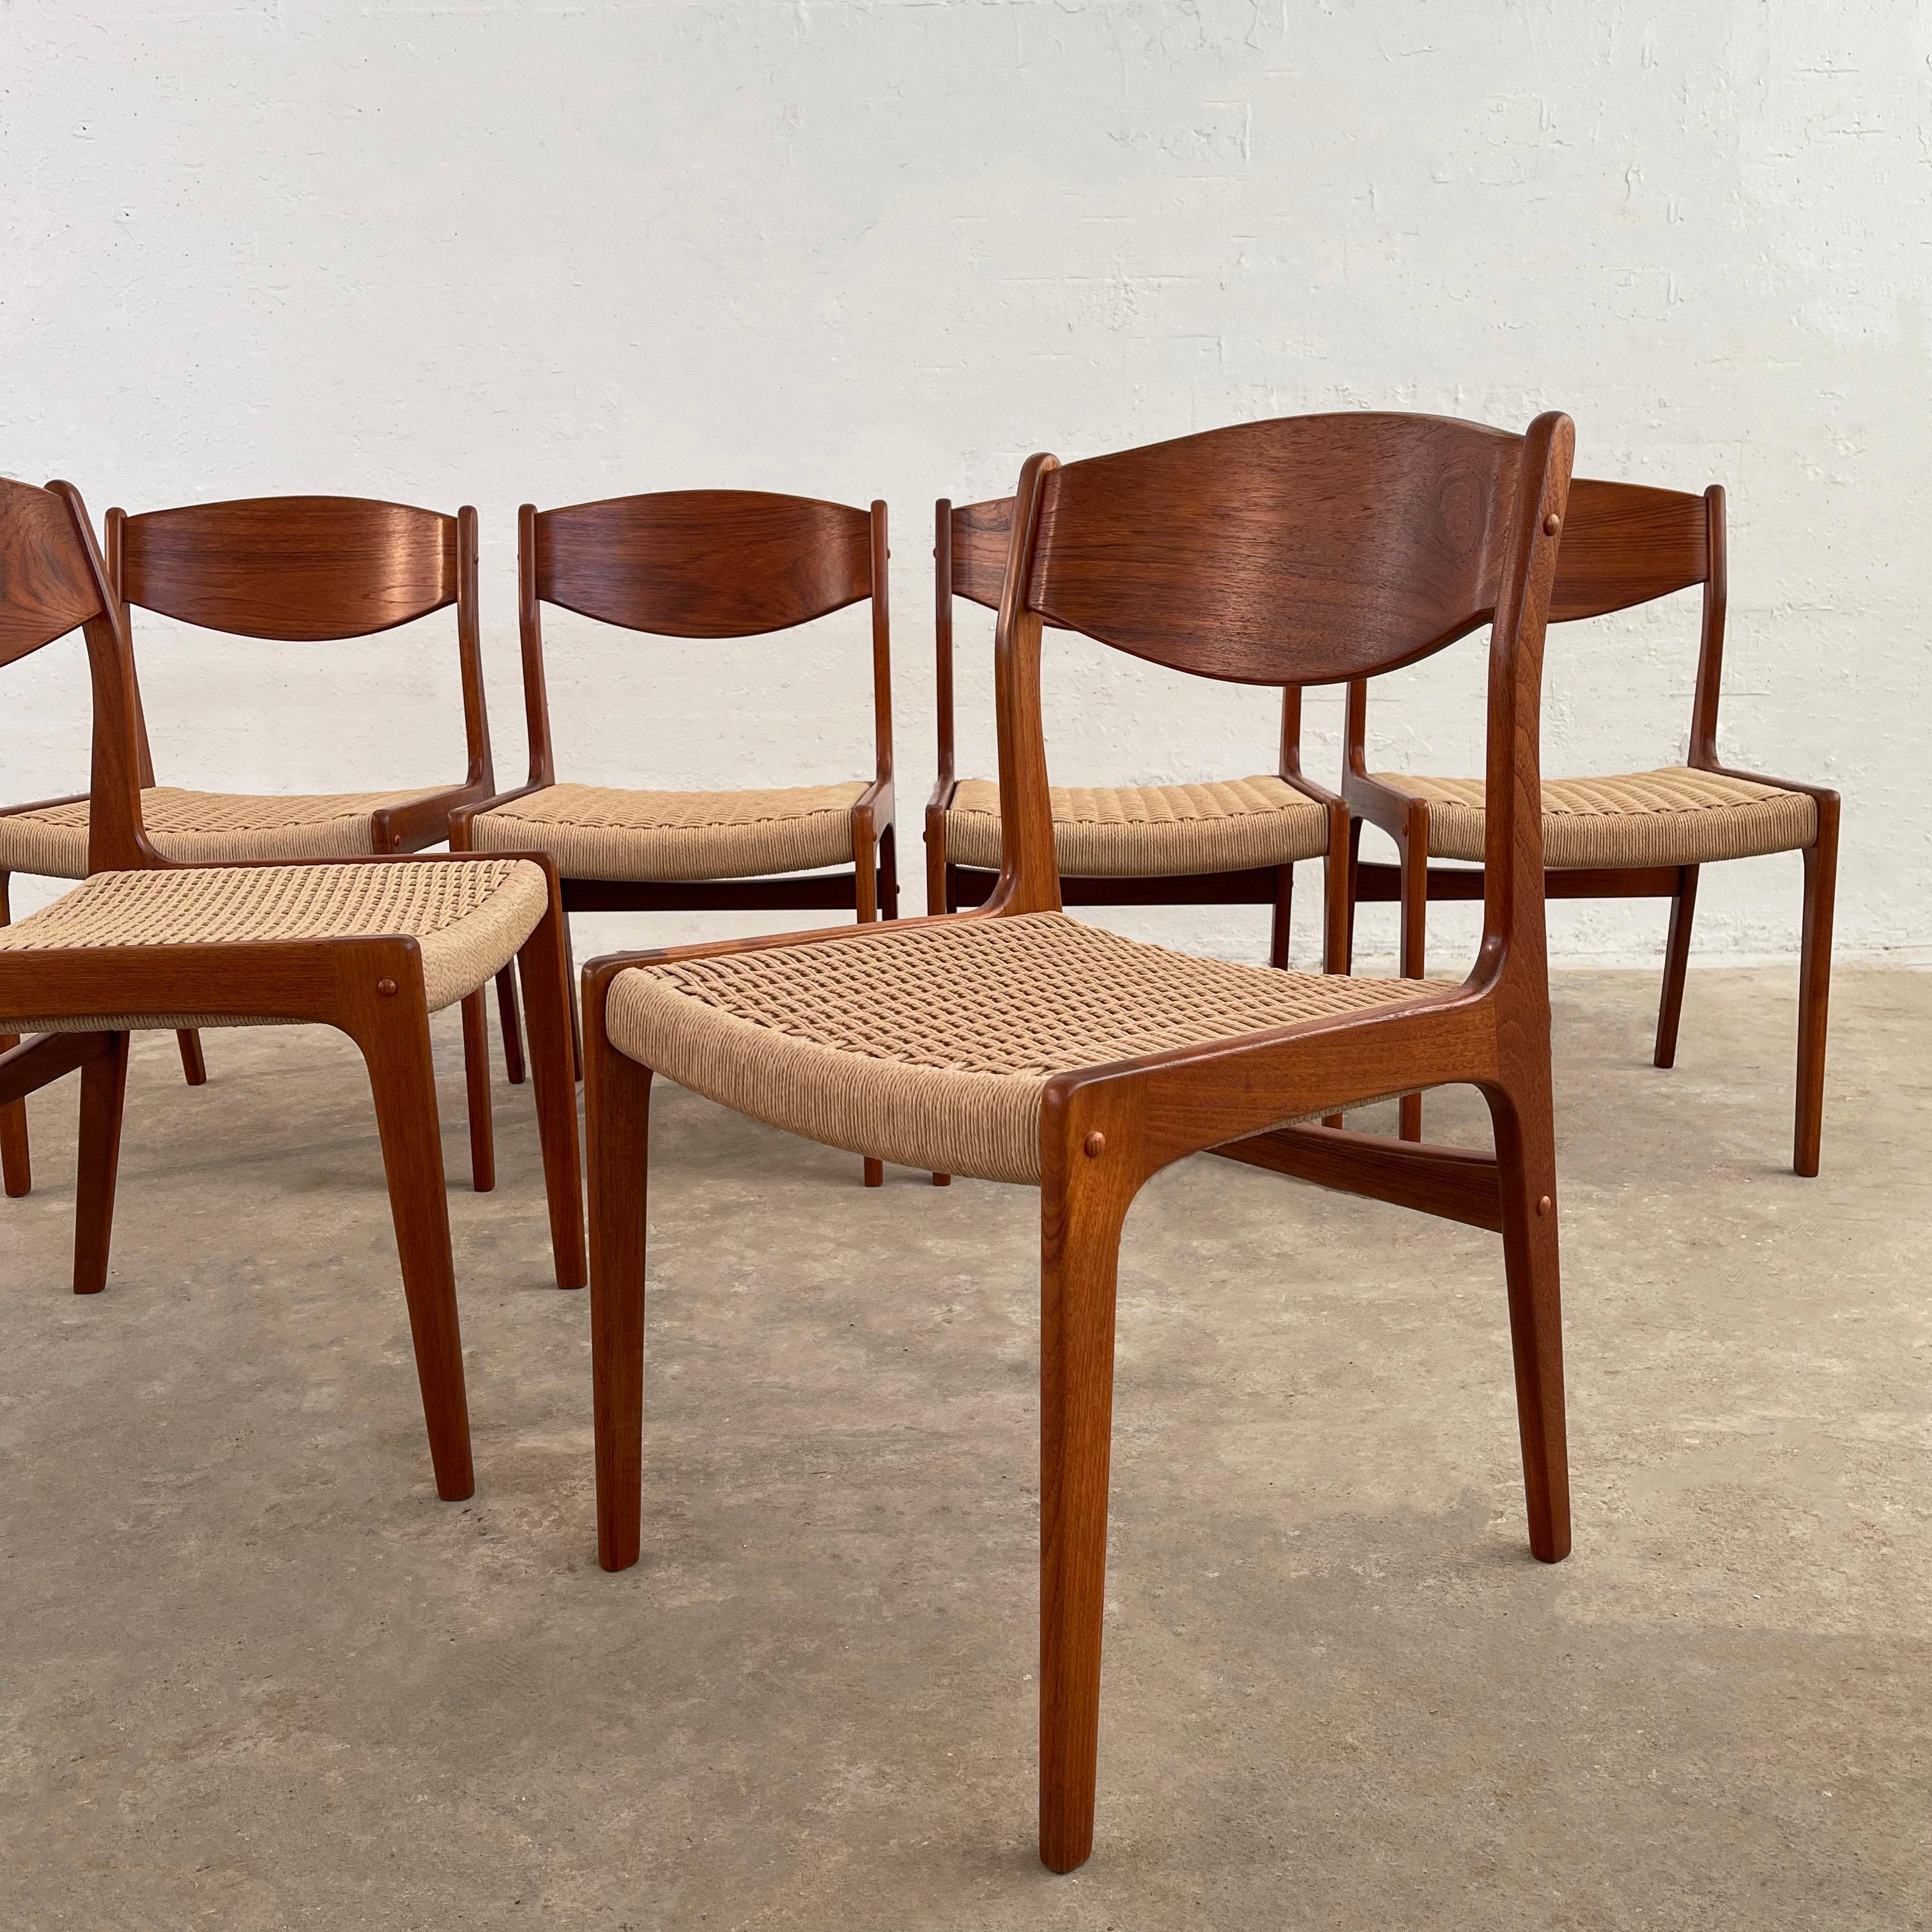 20th Century Scandinavian Modern Teak And Rope Weave Dining Chairs  For Sale